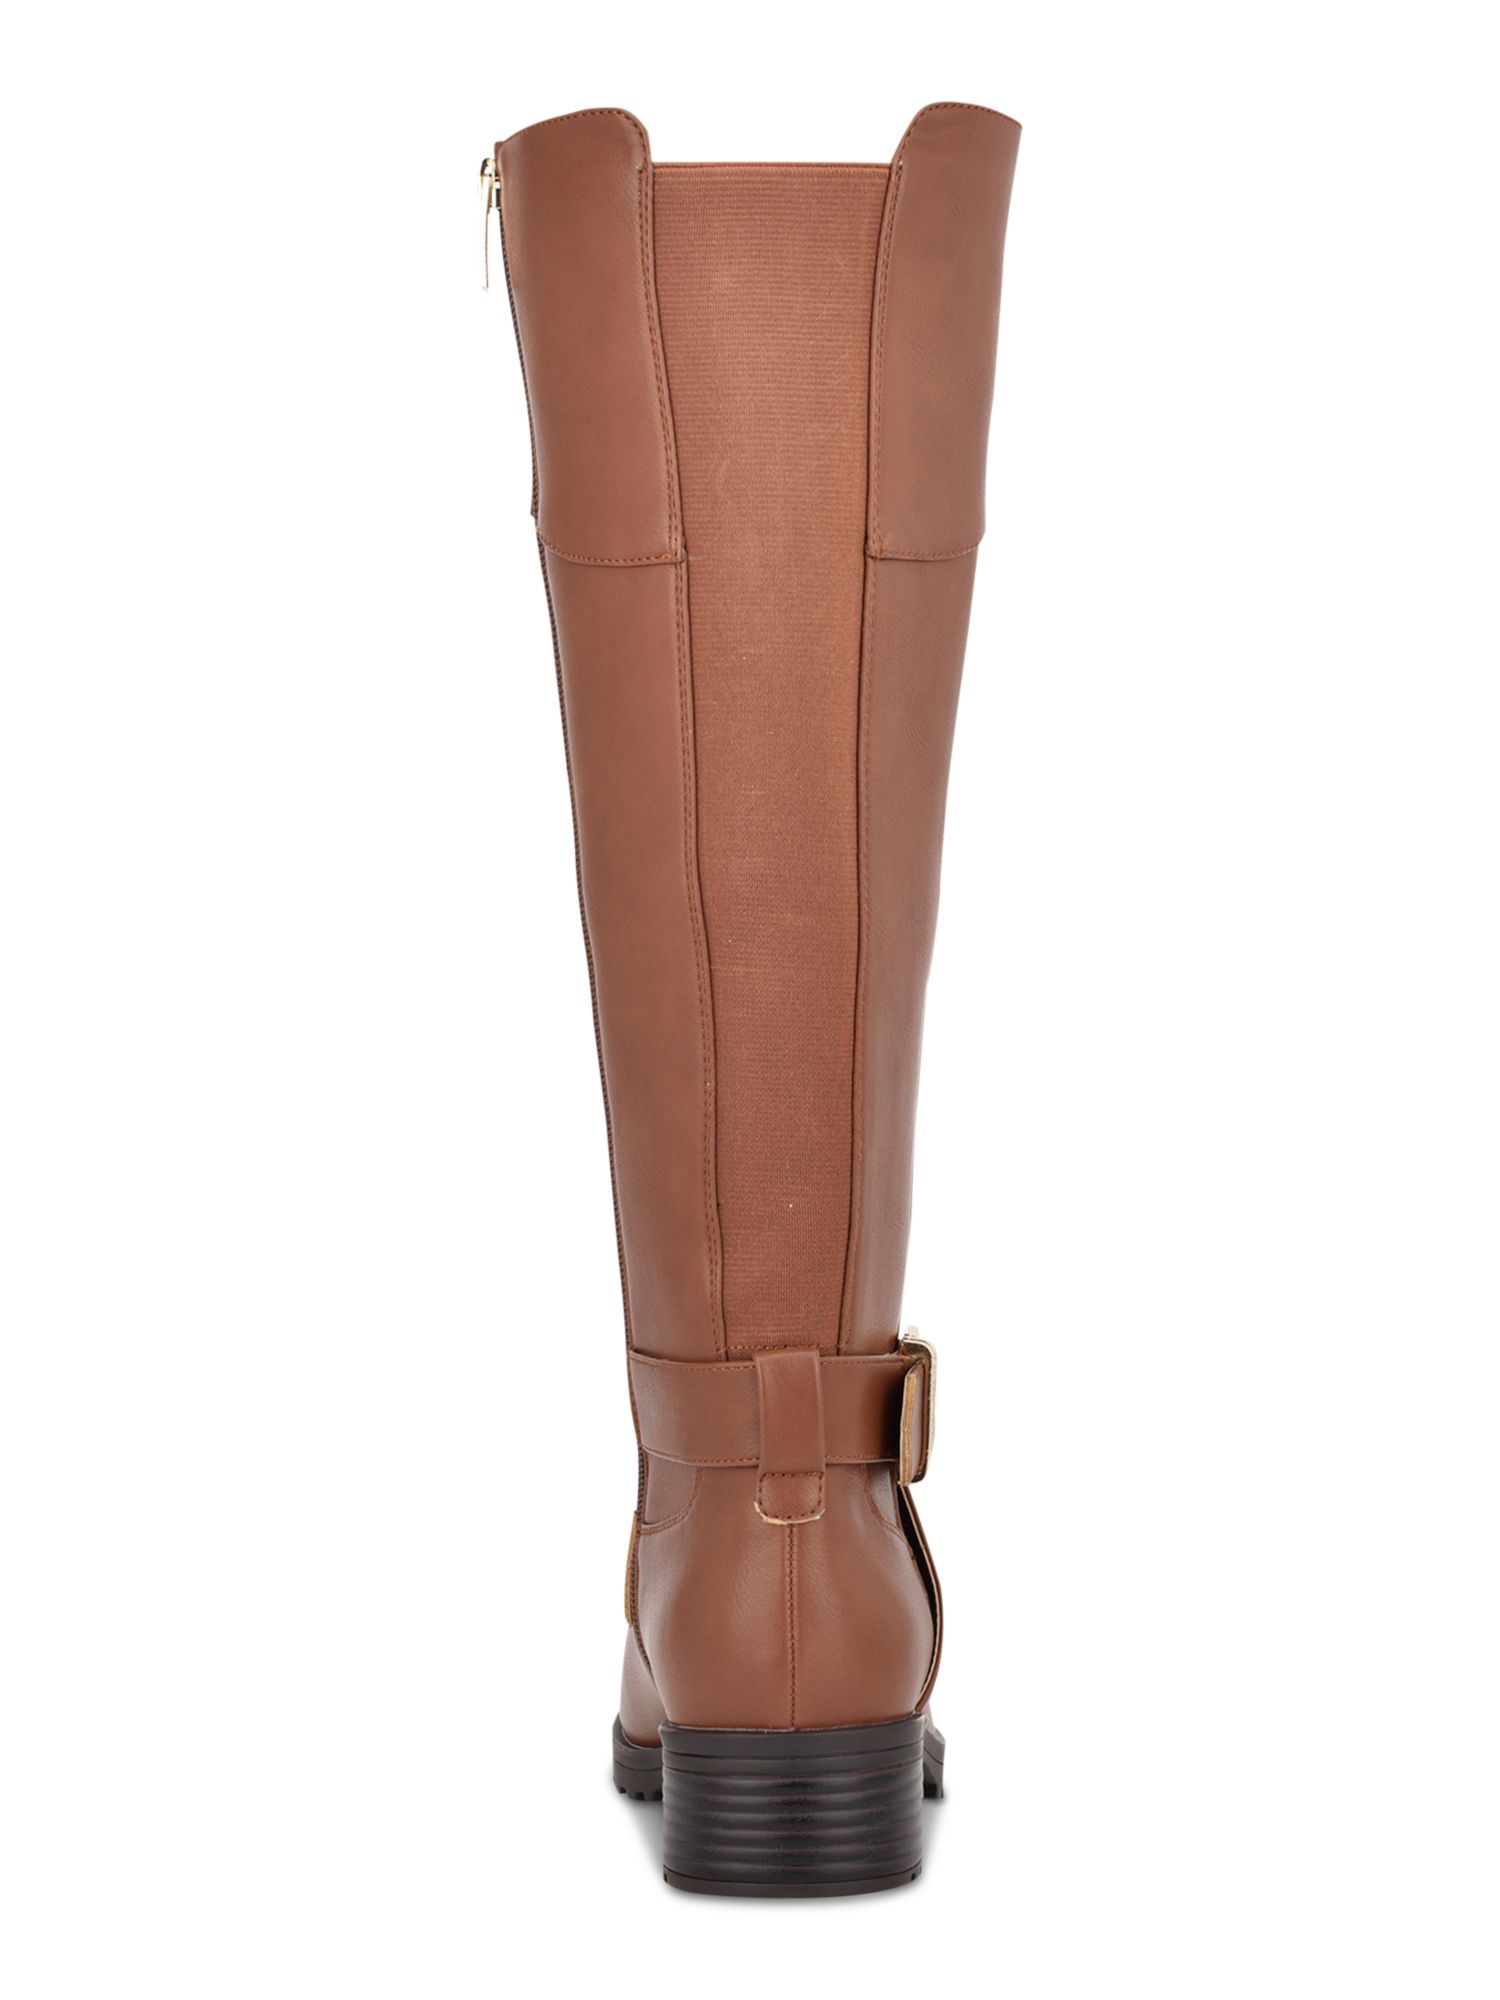 TOMMY HILFIGER Womens Brown Ankle Strap Buckle Accent Round Toe Block Heel Zip-Up Riding Boot 7